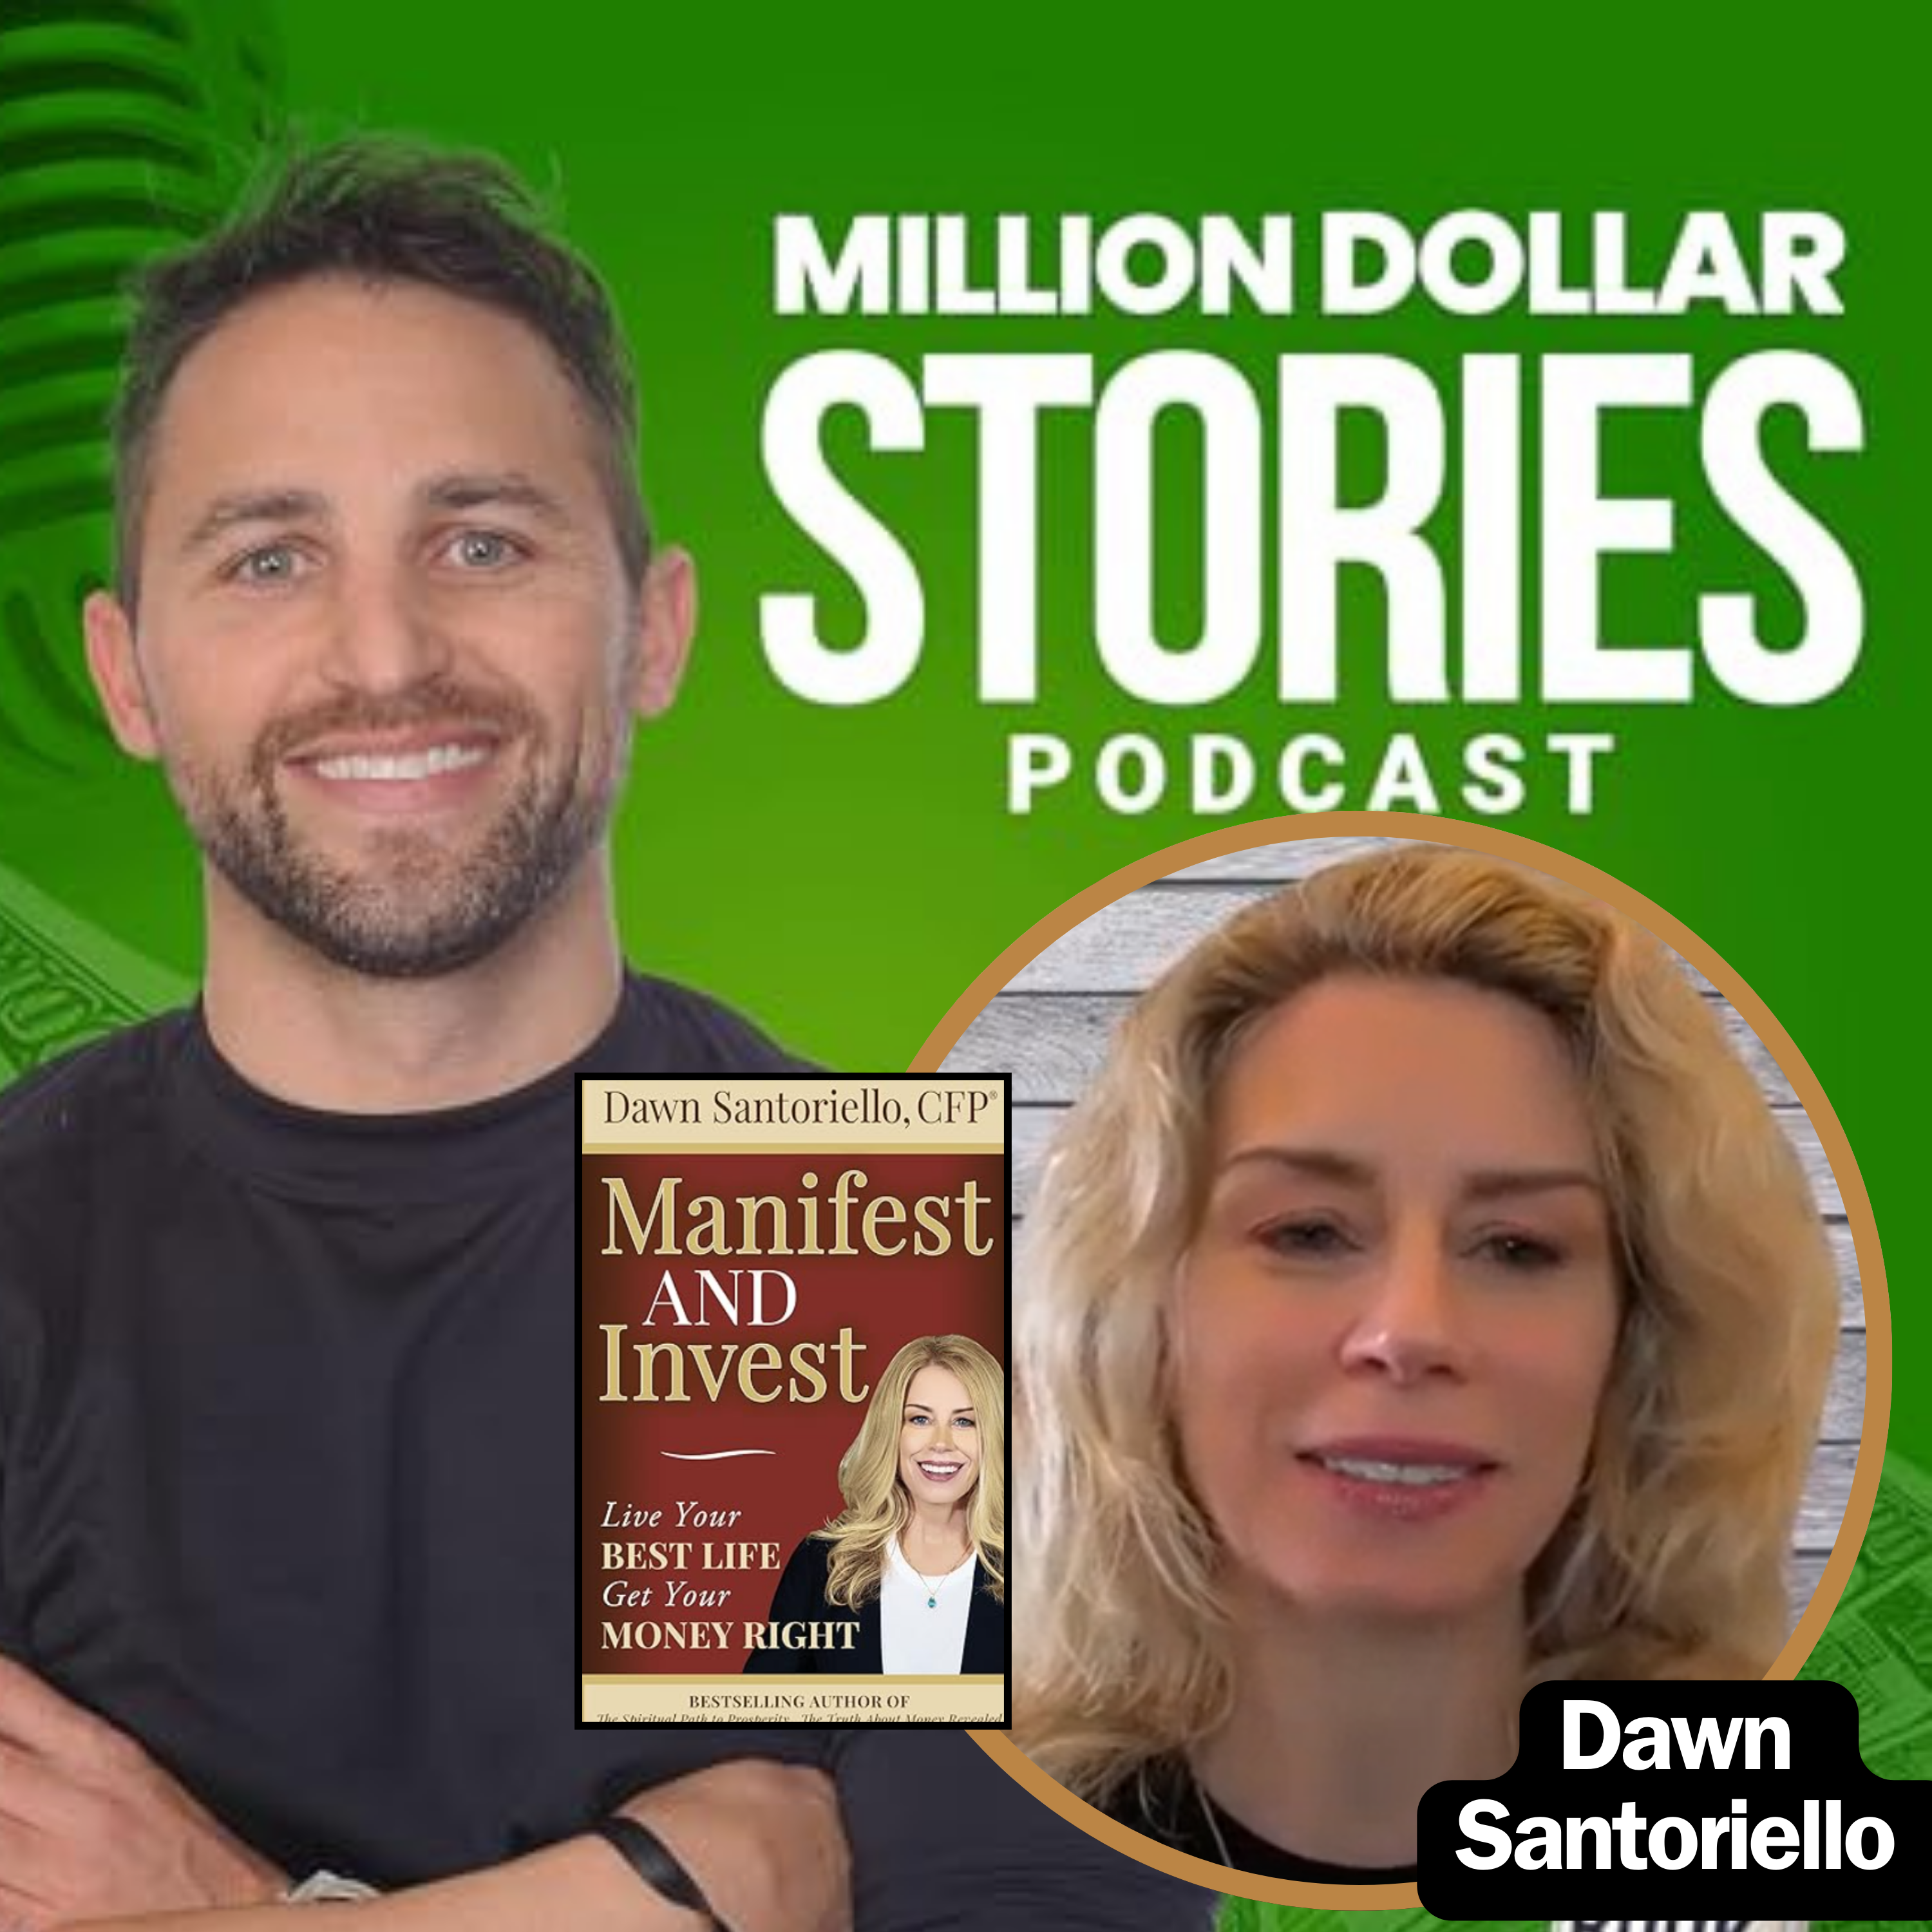 Dawn Santoriello – Author of “Manifest and Invest: Live Your Best Life Get Your Money Right”